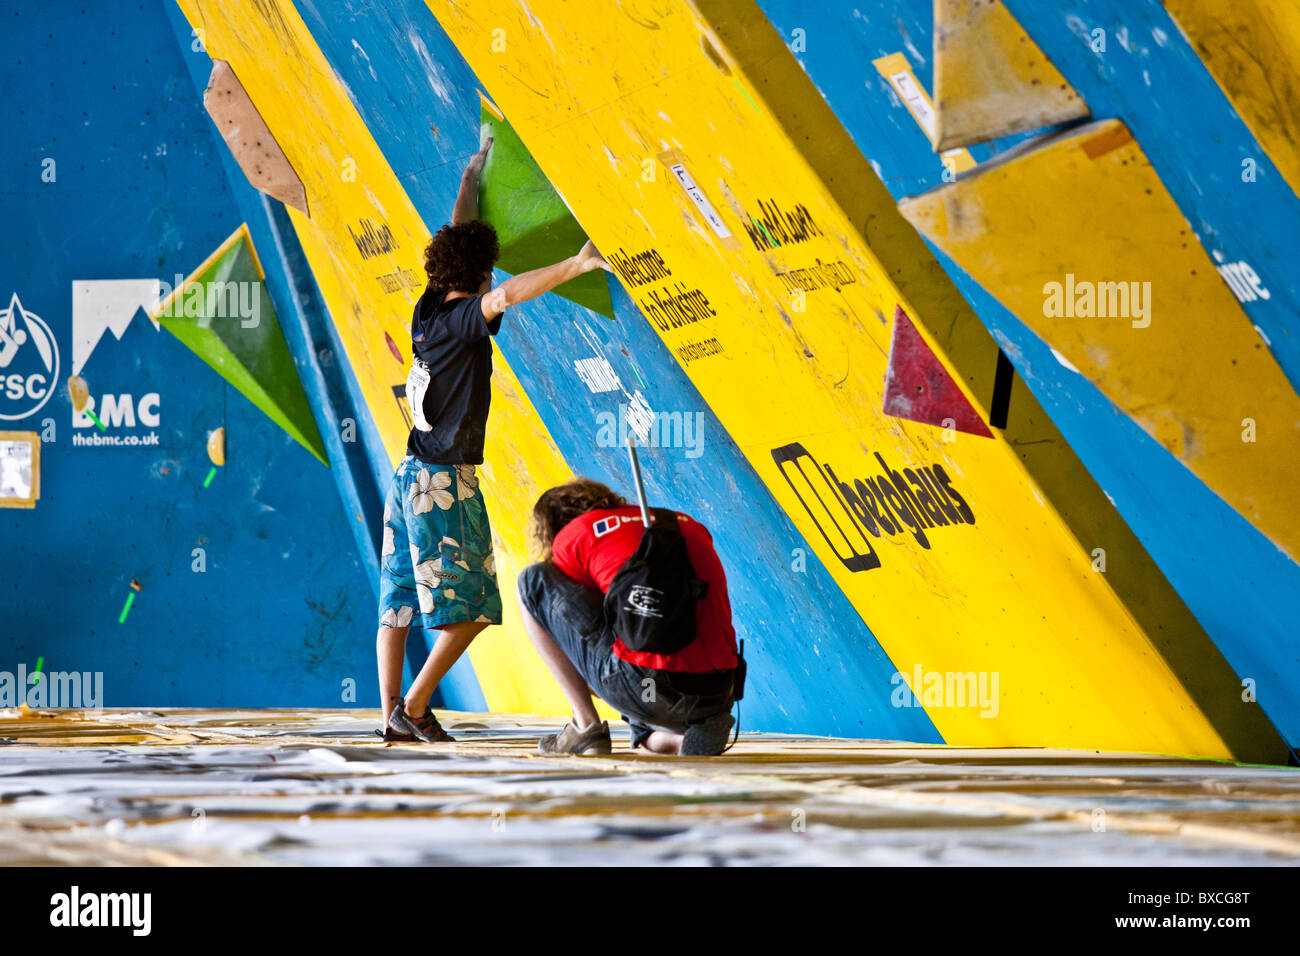 Guillaume Glairon Mondet, the French sport climber, competes at the 2010 IFSC Bouldering World Cup in Sheffield. Stock Photo